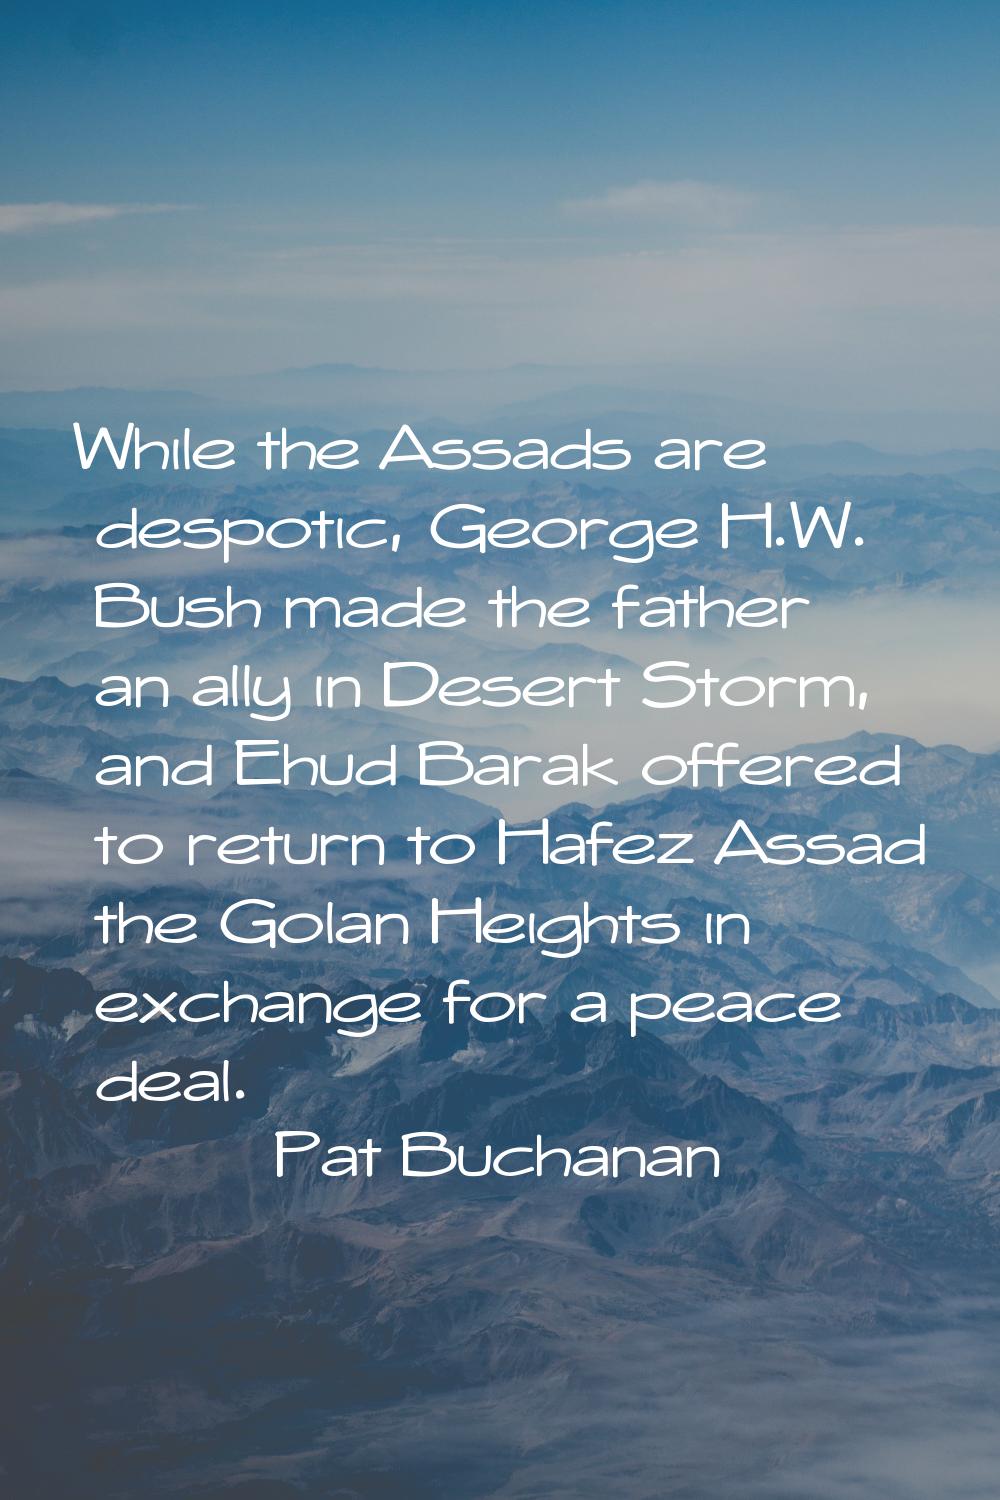 While the Assads are despotic, George H.W. Bush made the father an ally in Desert Storm, and Ehud B